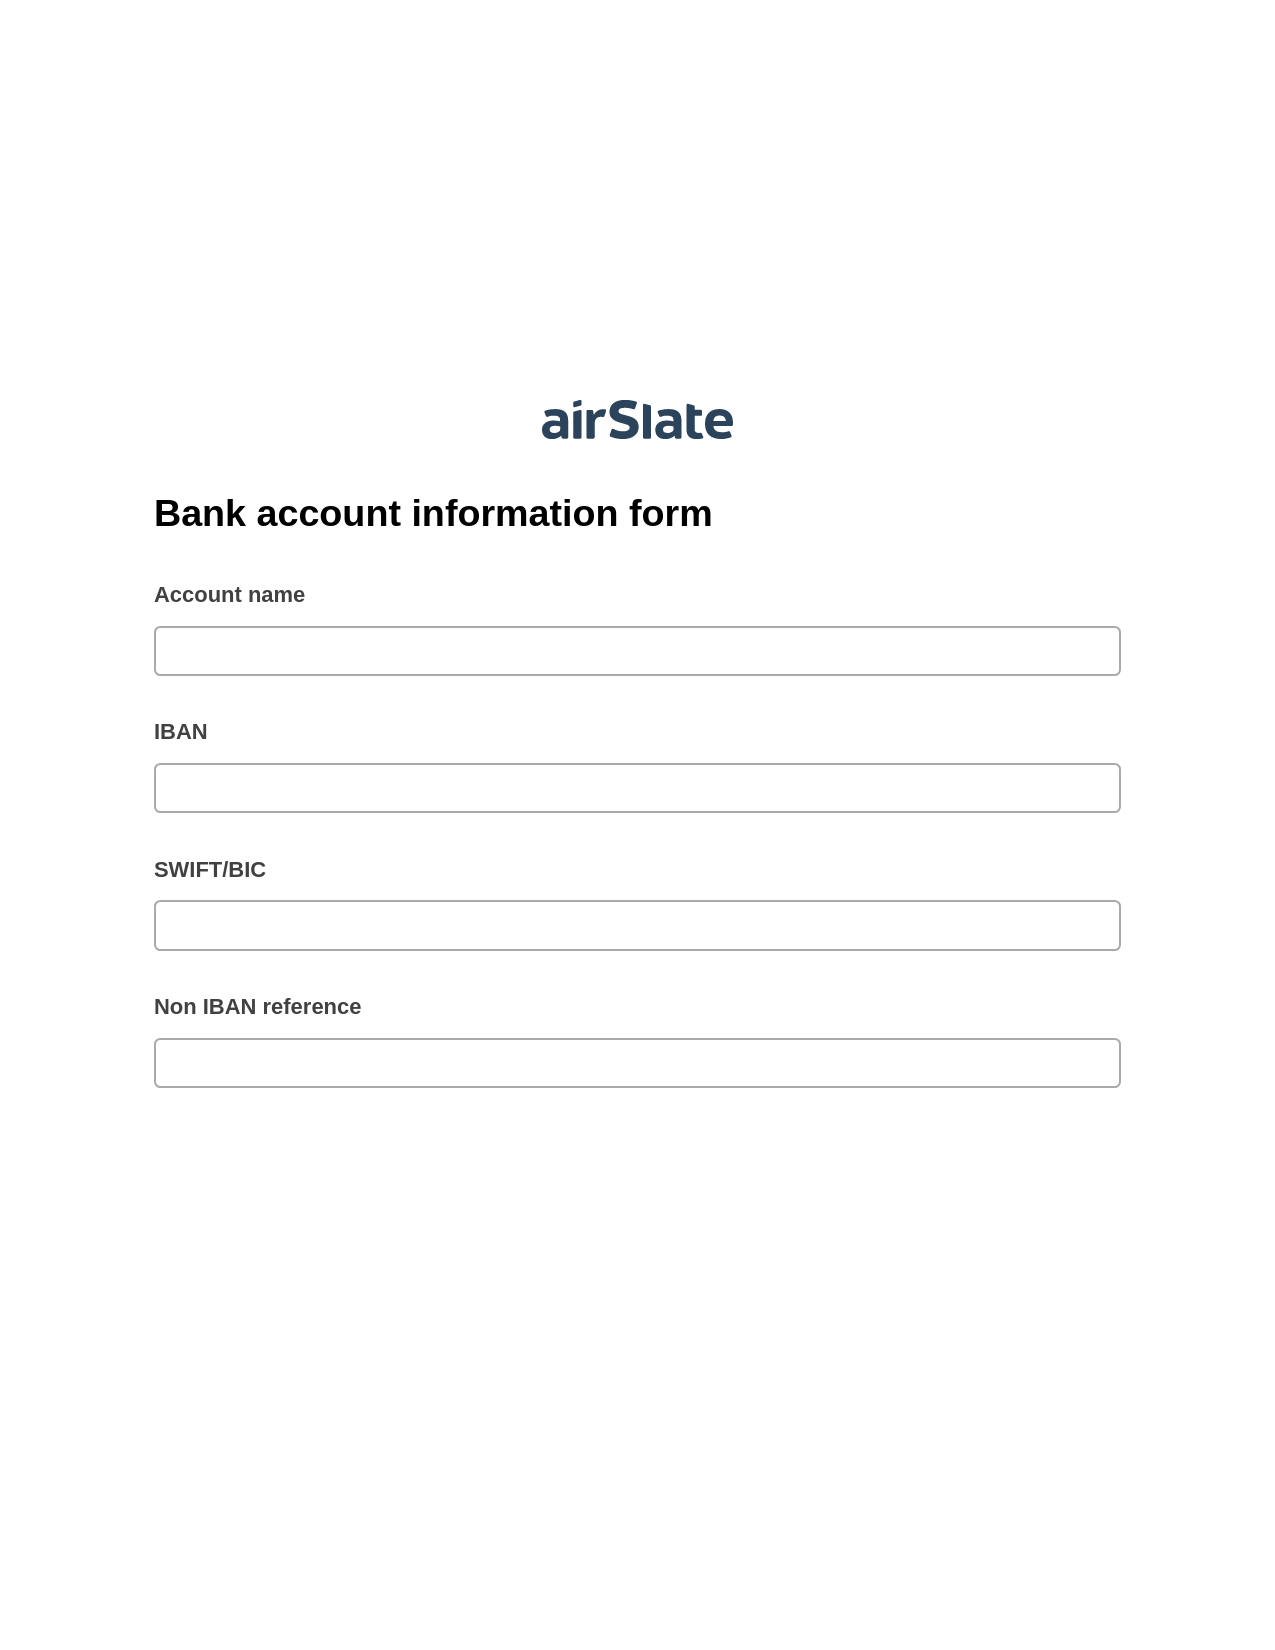 Bank account information form Pre-fill from CSV File Bot, Unassign Role Bot, Export to NetSuite Record Bot